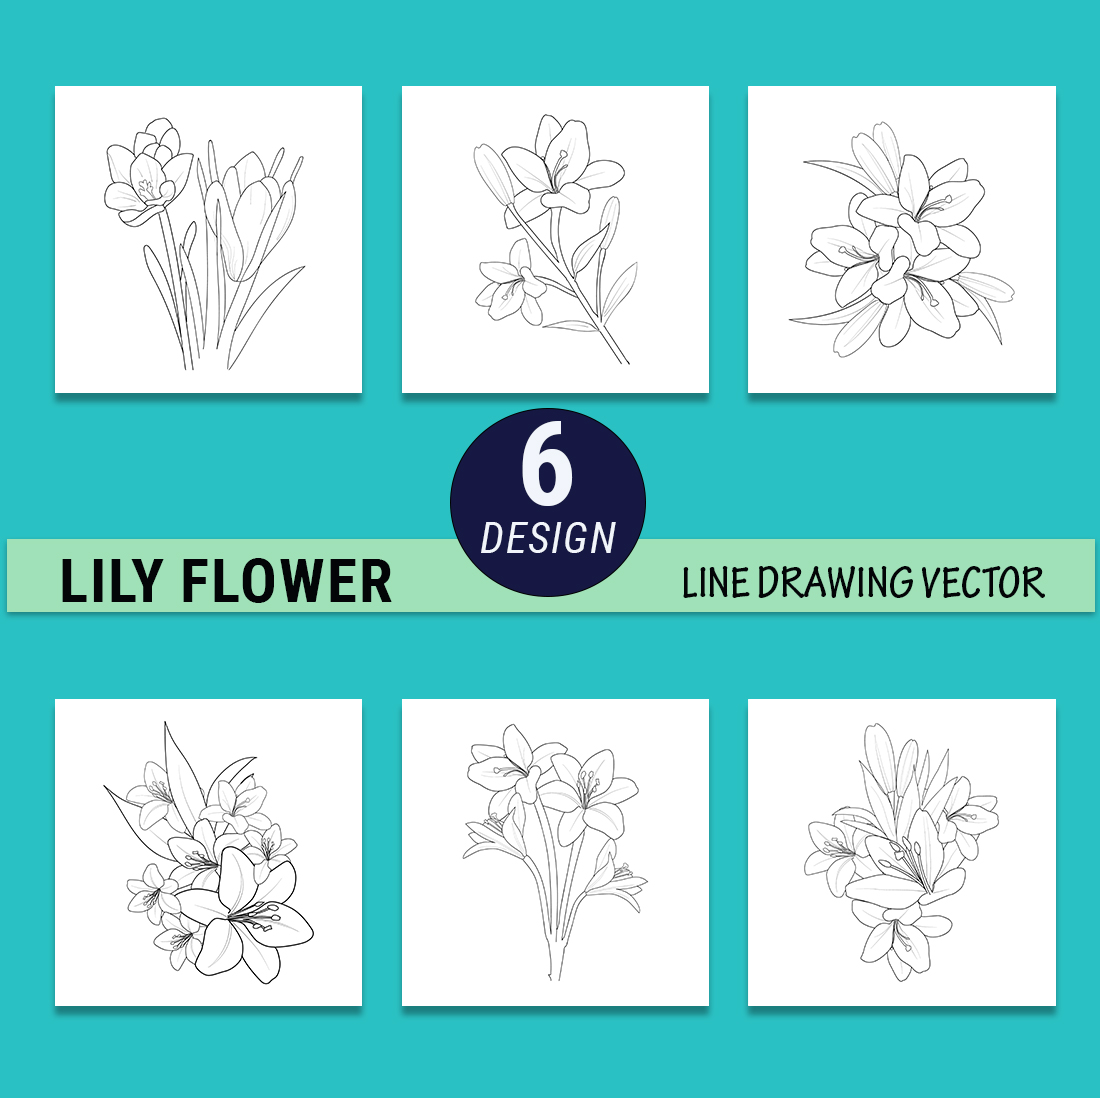 lily flower pencil art, lily flower outline drawing, lily flower pattern designs, pencil drawing lilys, simple lily flower drawing for kids preview image.